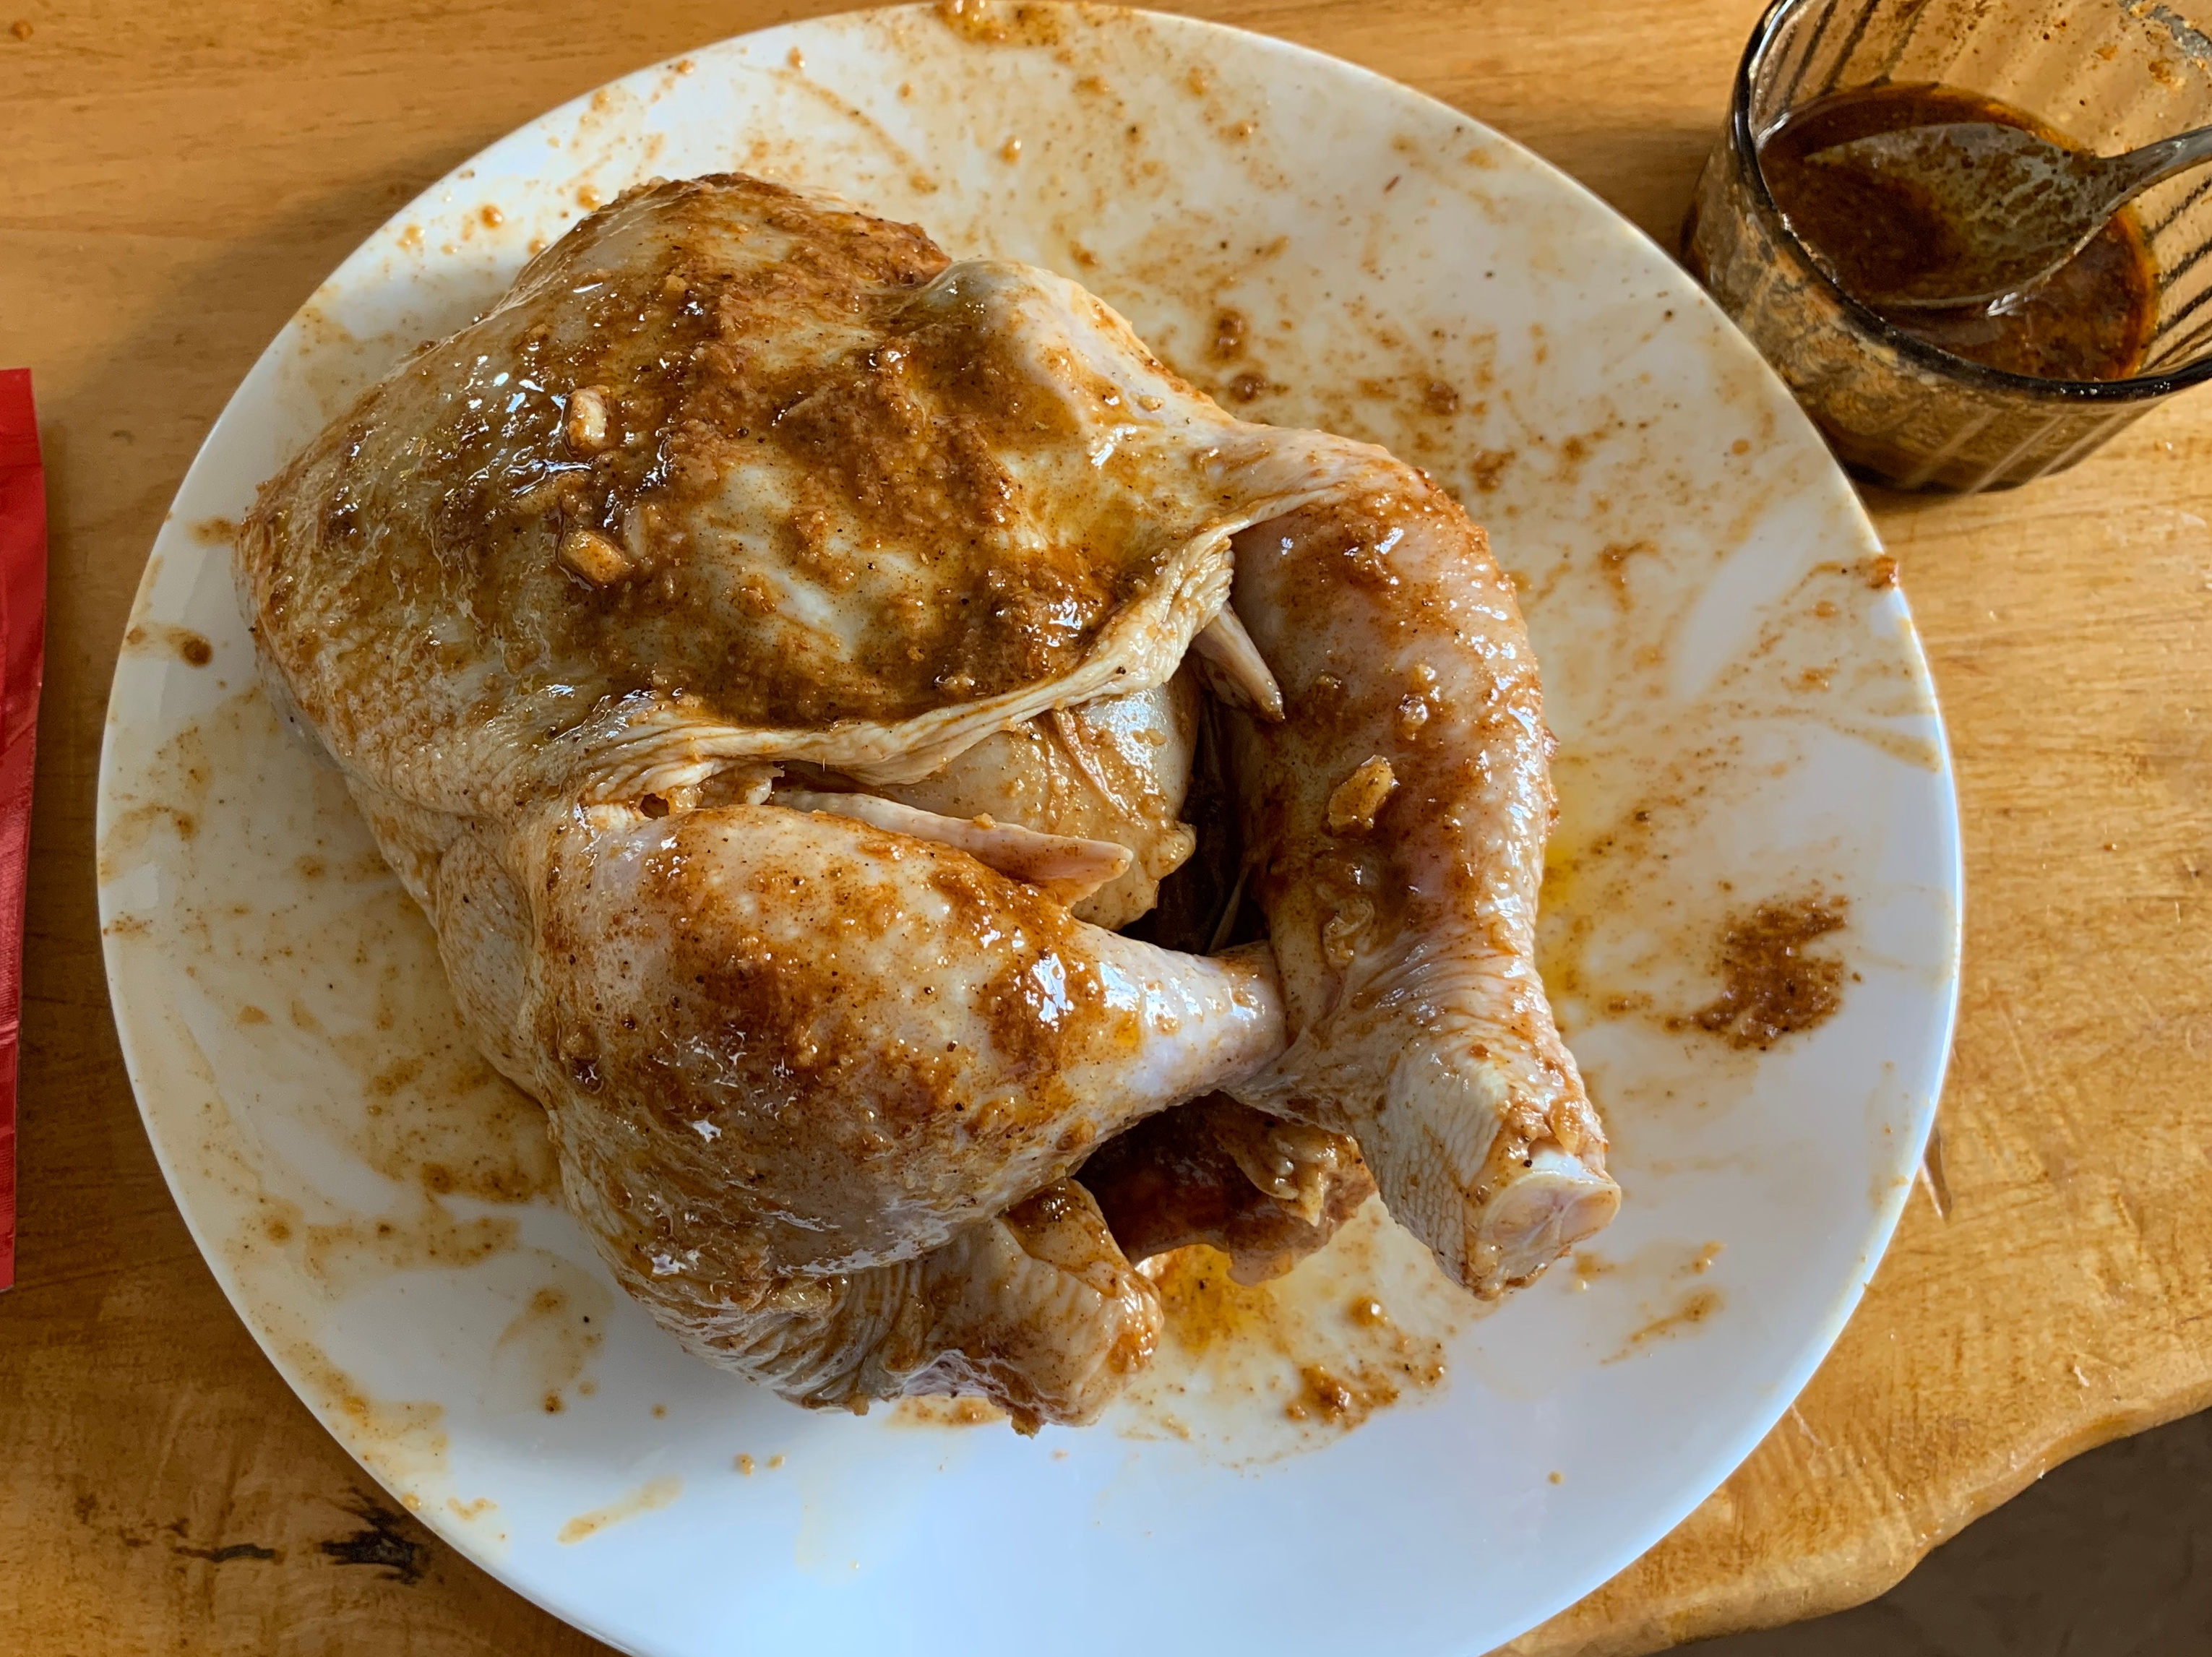 Another chicken, this time rubbed with Leena Spices' Portuguese spice.  It's a bit more red, with visible garlic chunks.